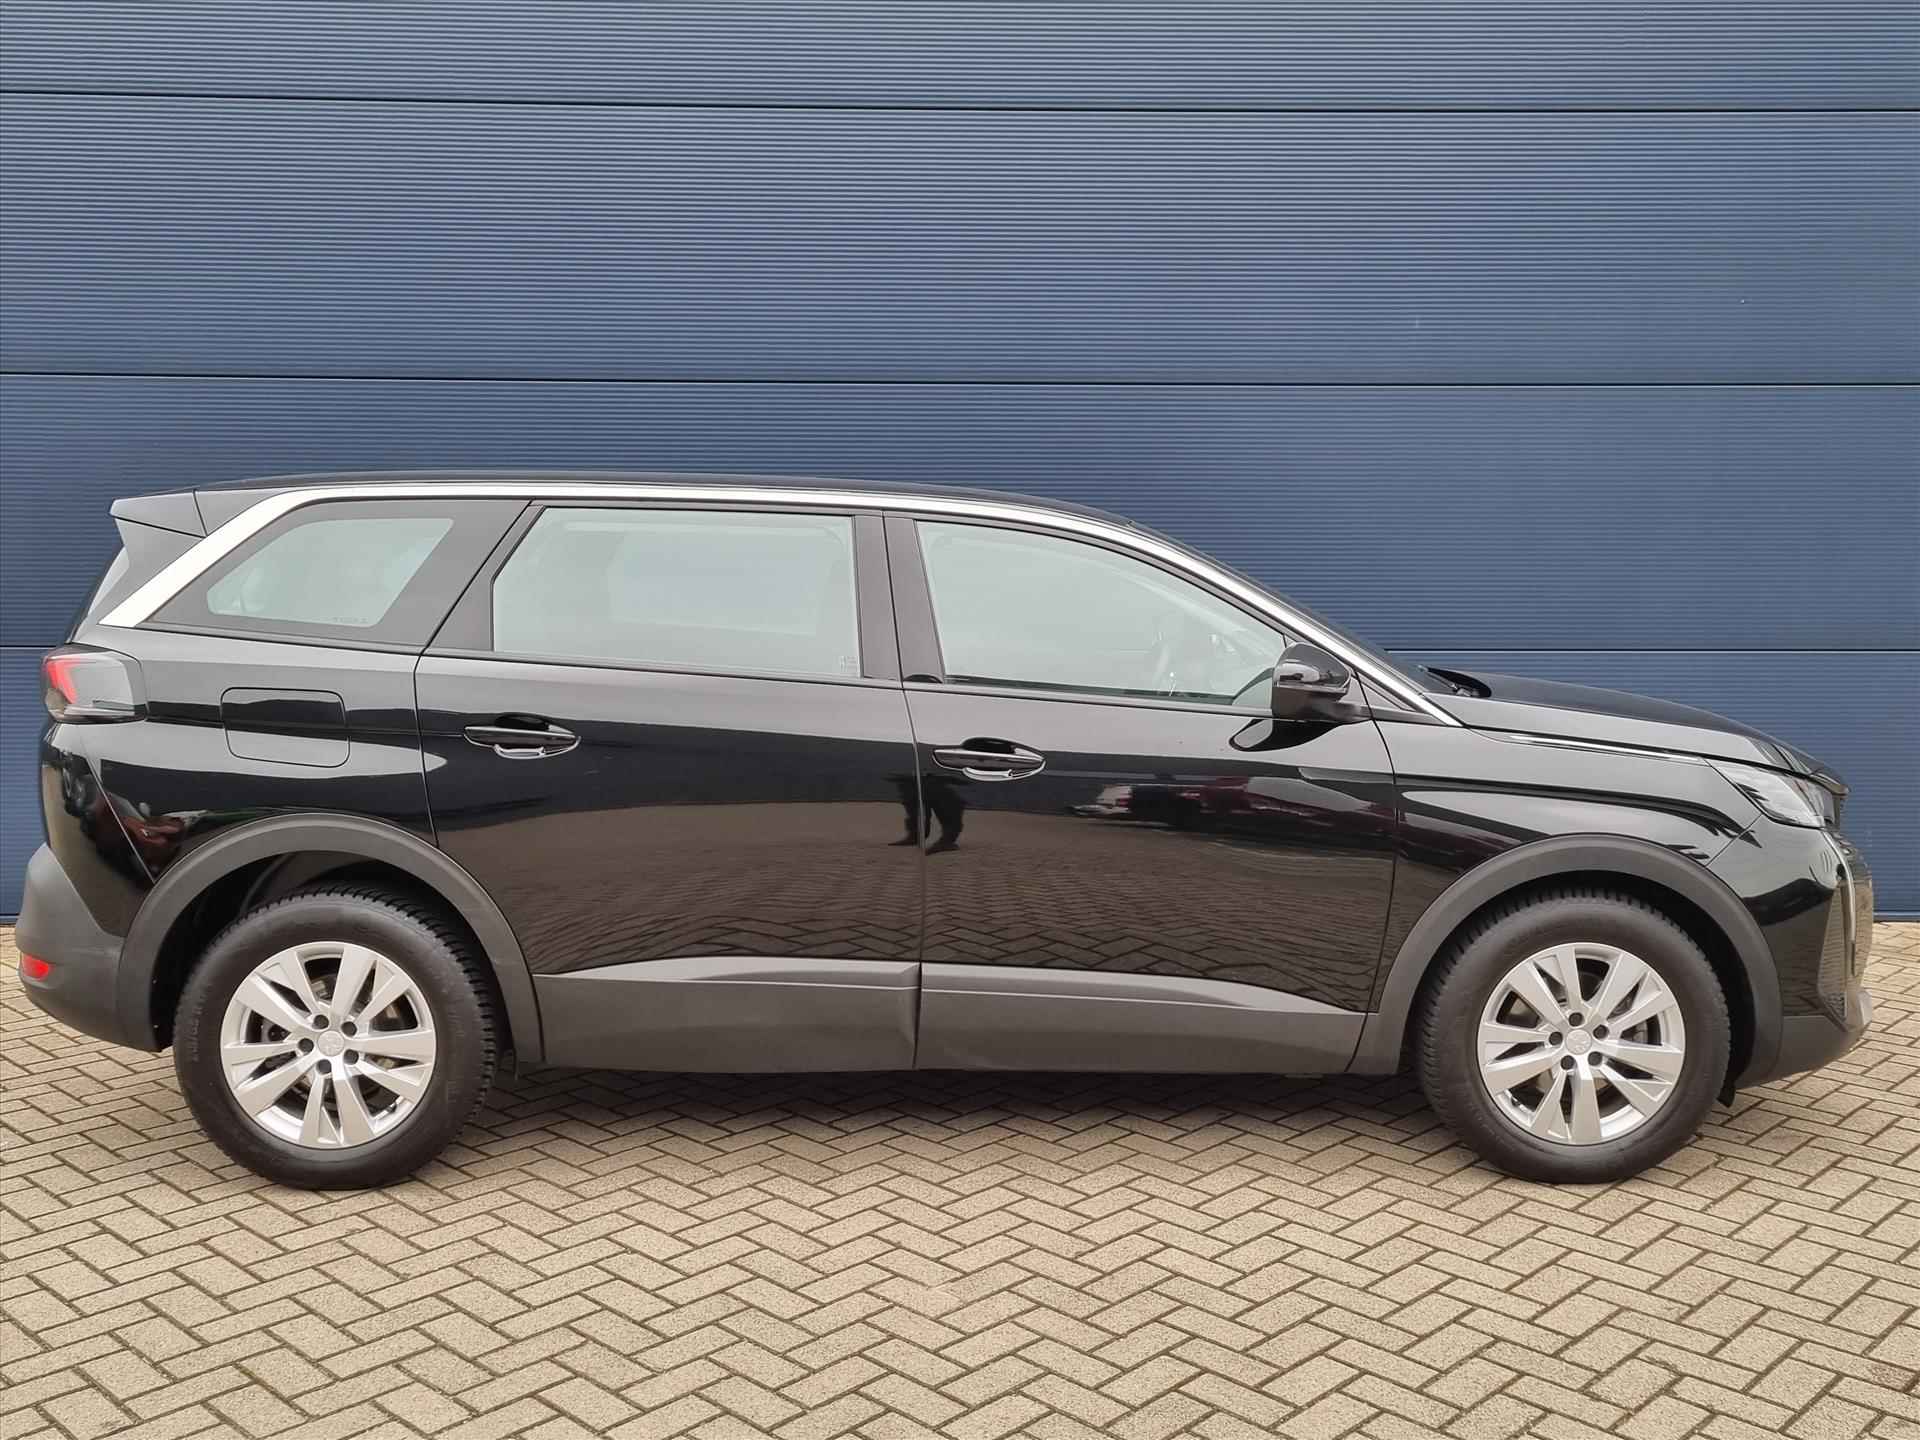 PEUGEOT 5008 1.2 Turbo 130pk Active Pack Business Automaat | Navigatie | Camera | All Season Banden | 7-Persoons | Climate Control | Parkeersensoren V+A | - 6/46